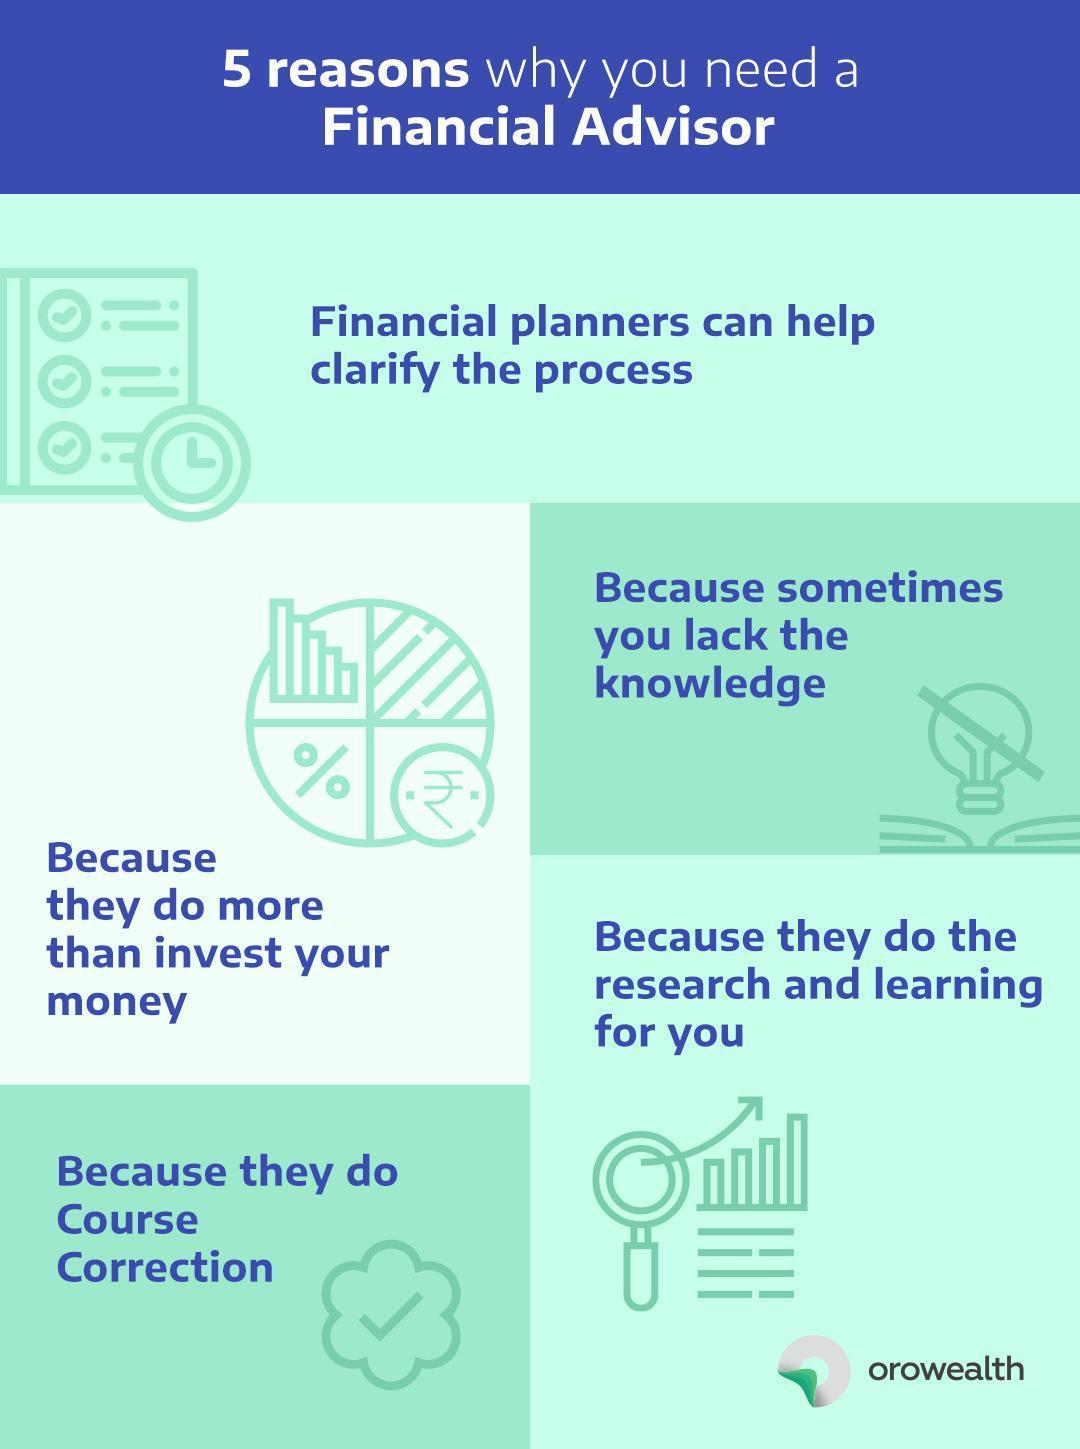 How a Financial Planner Can Help You